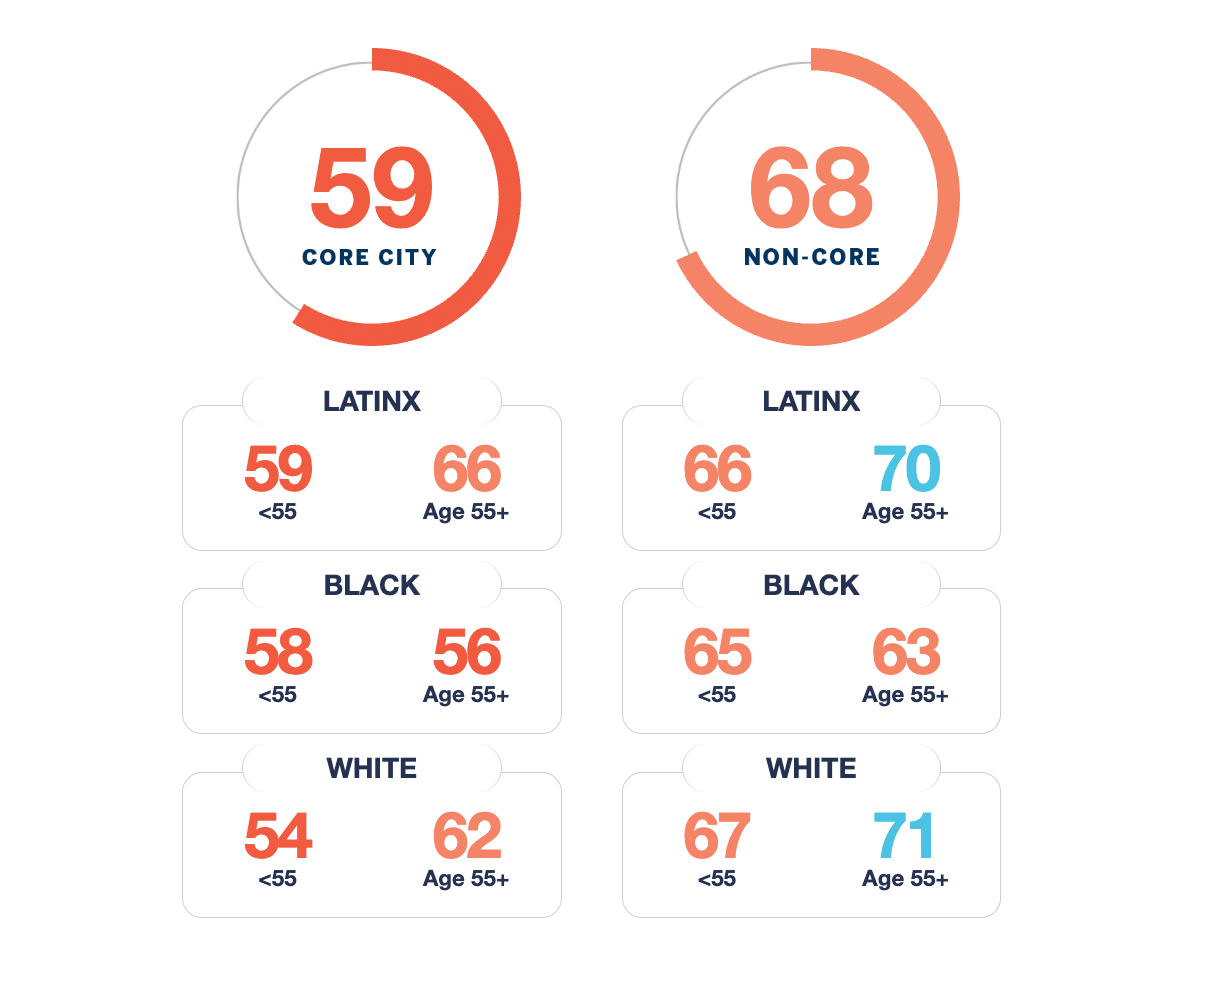 Chart breakdown: Core City: 63 (broken down by Latinx, Black, and White ages less than and over 55) Non-Core: 76 (broken down by Latinx, Black, and White ages less than and over 55)